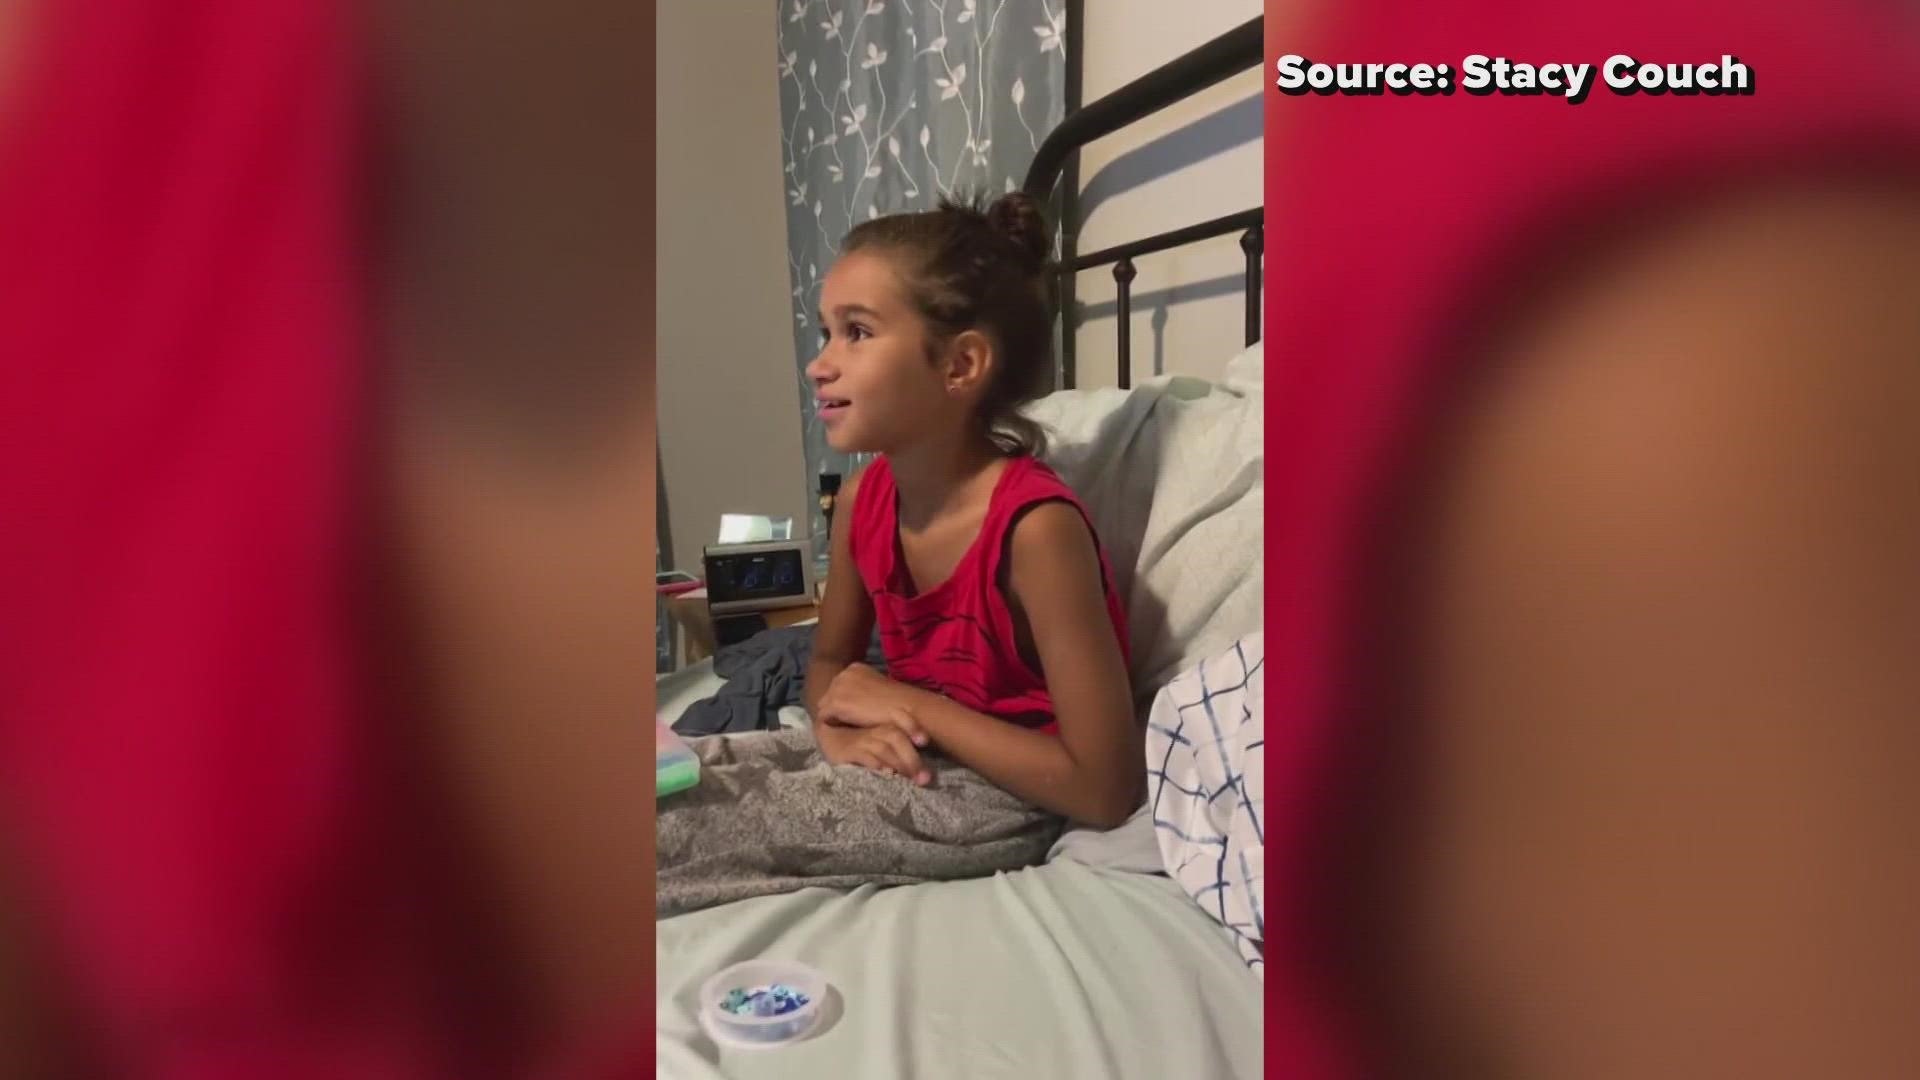 The Couch family adopted Makayla when she was a baby. It warmed their heart to watch her react to a live-action Disney princess that looks like her.